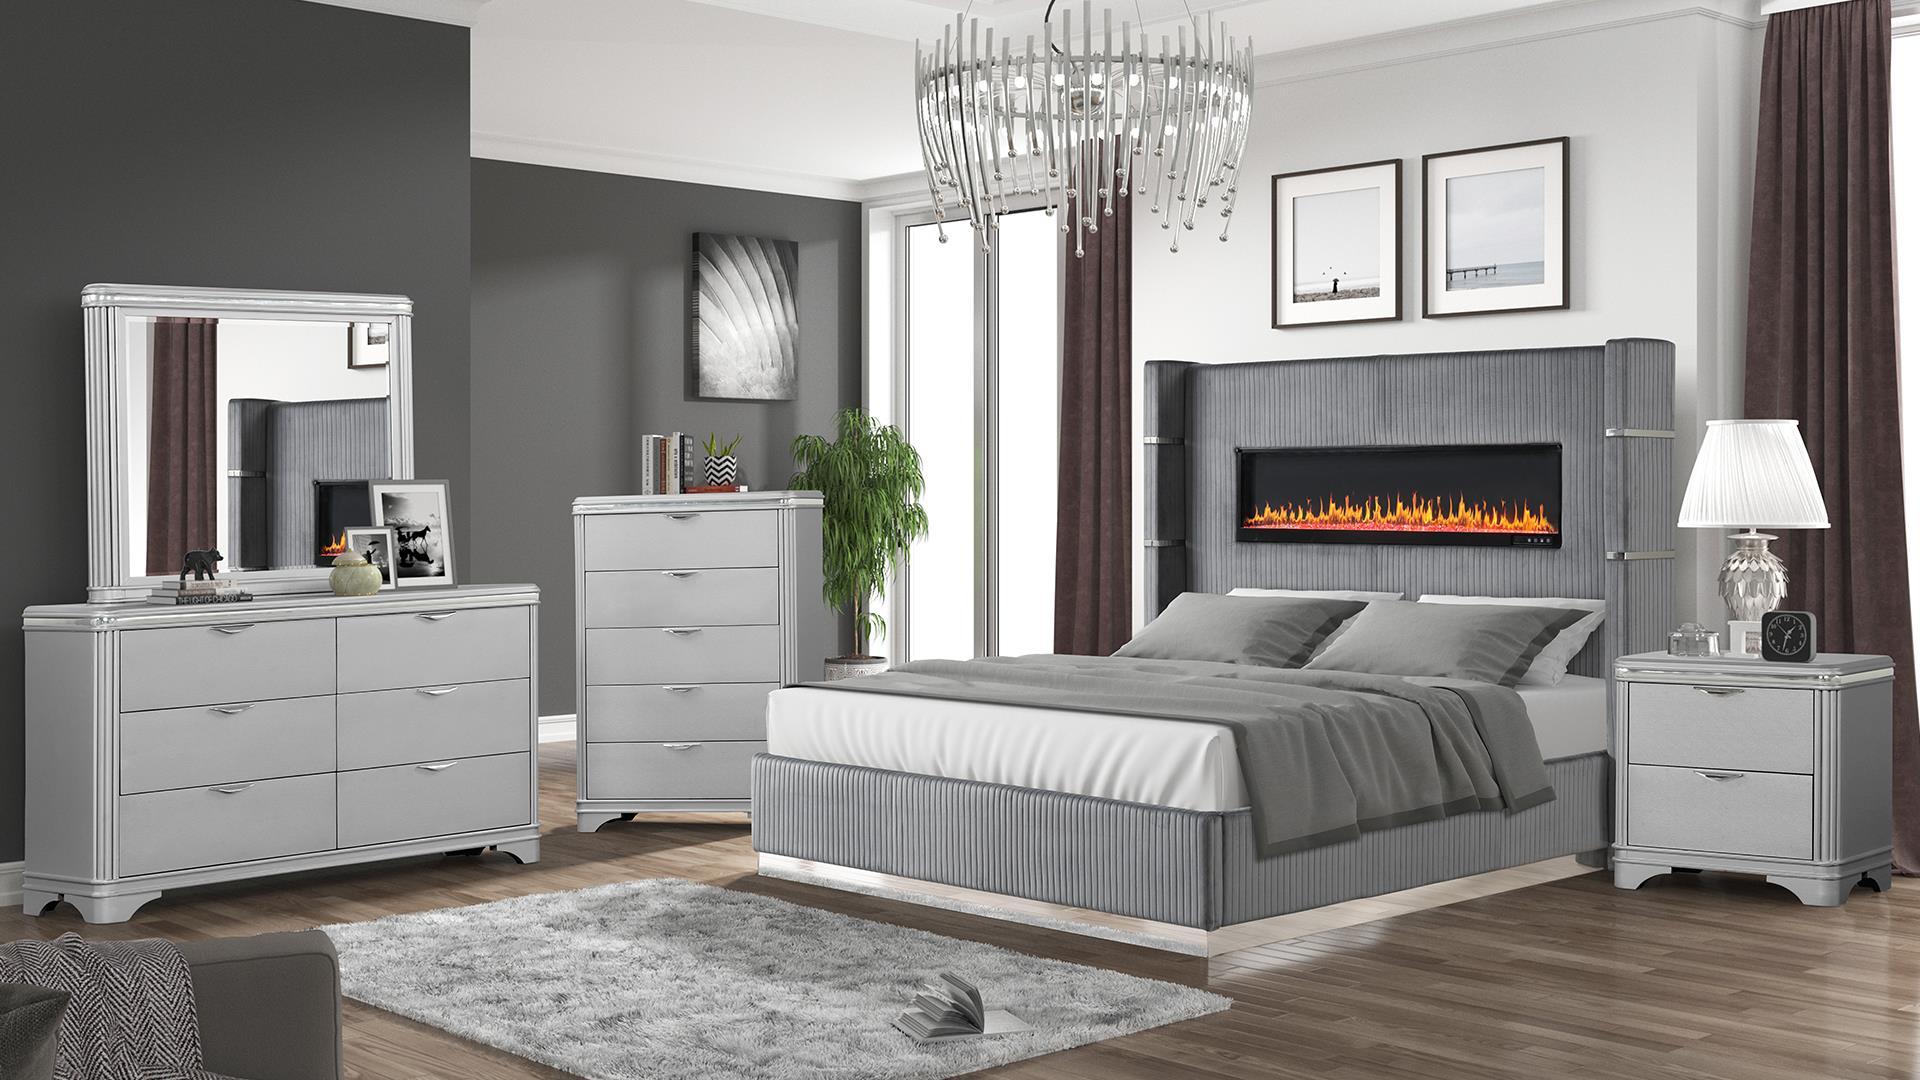 

    
Glam Gray Queen Bedroom Set 5Pcs LIZELLE Galaxy Home Contemporary Luxury
